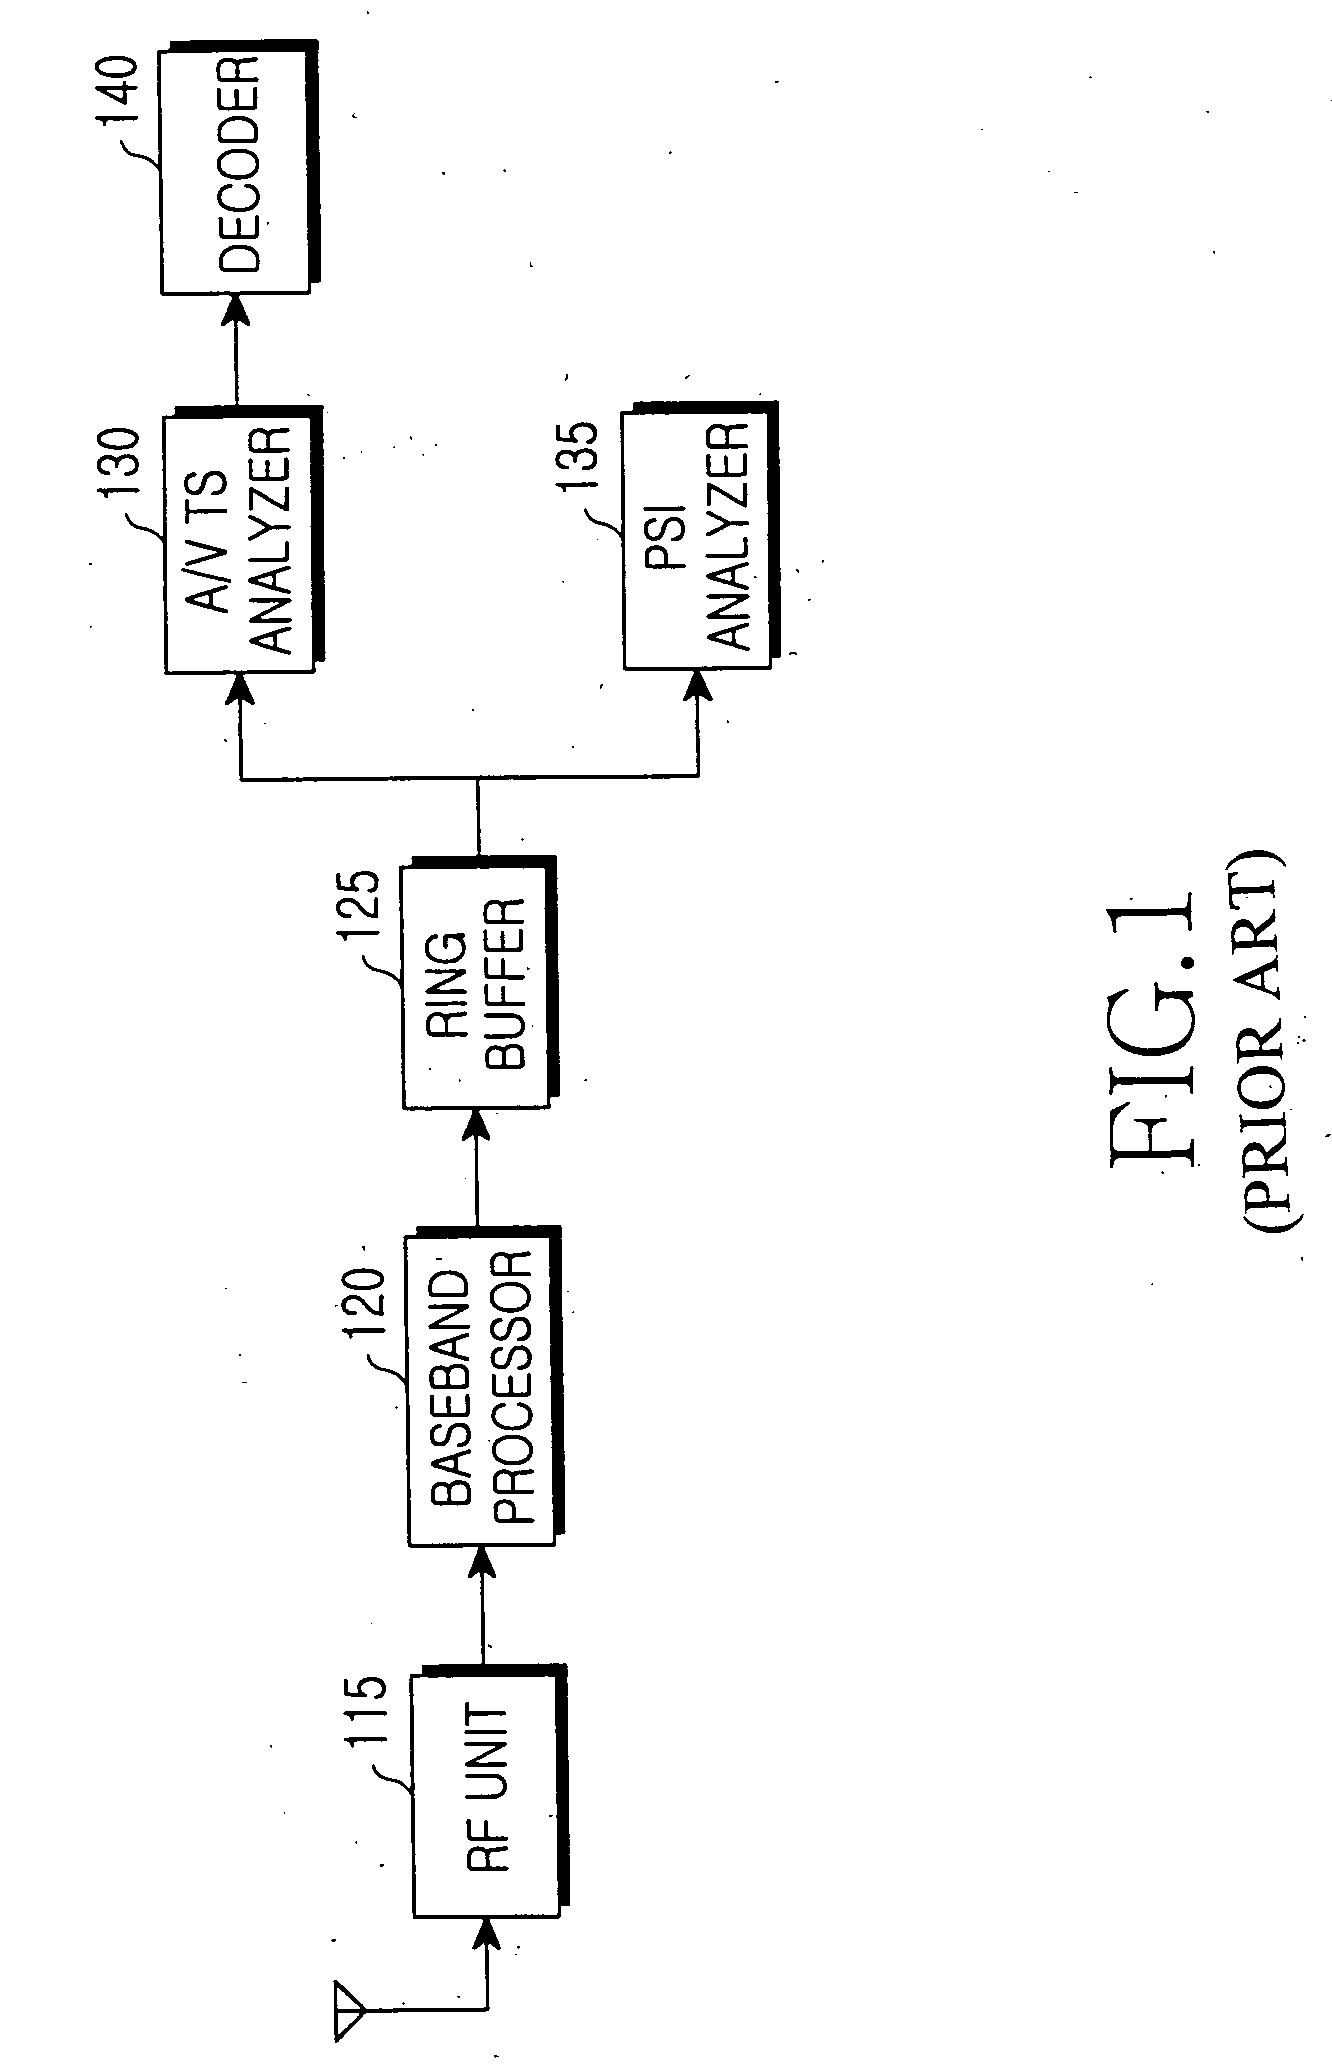 Method of searching for broadcasting channel of specific program in a DMB receiving terminal